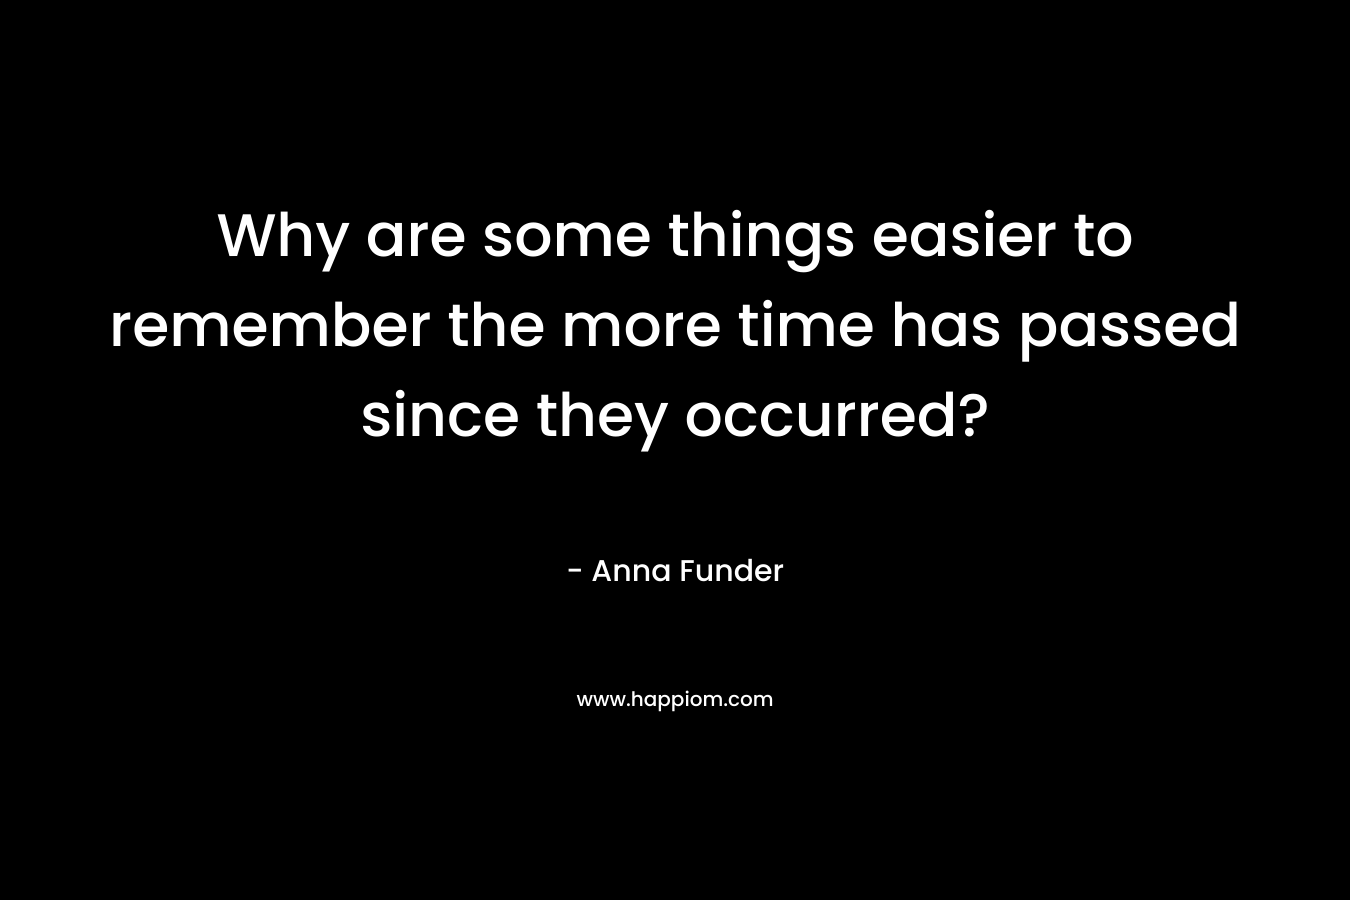 Why are some things easier to remember the more time has passed since they occurred?